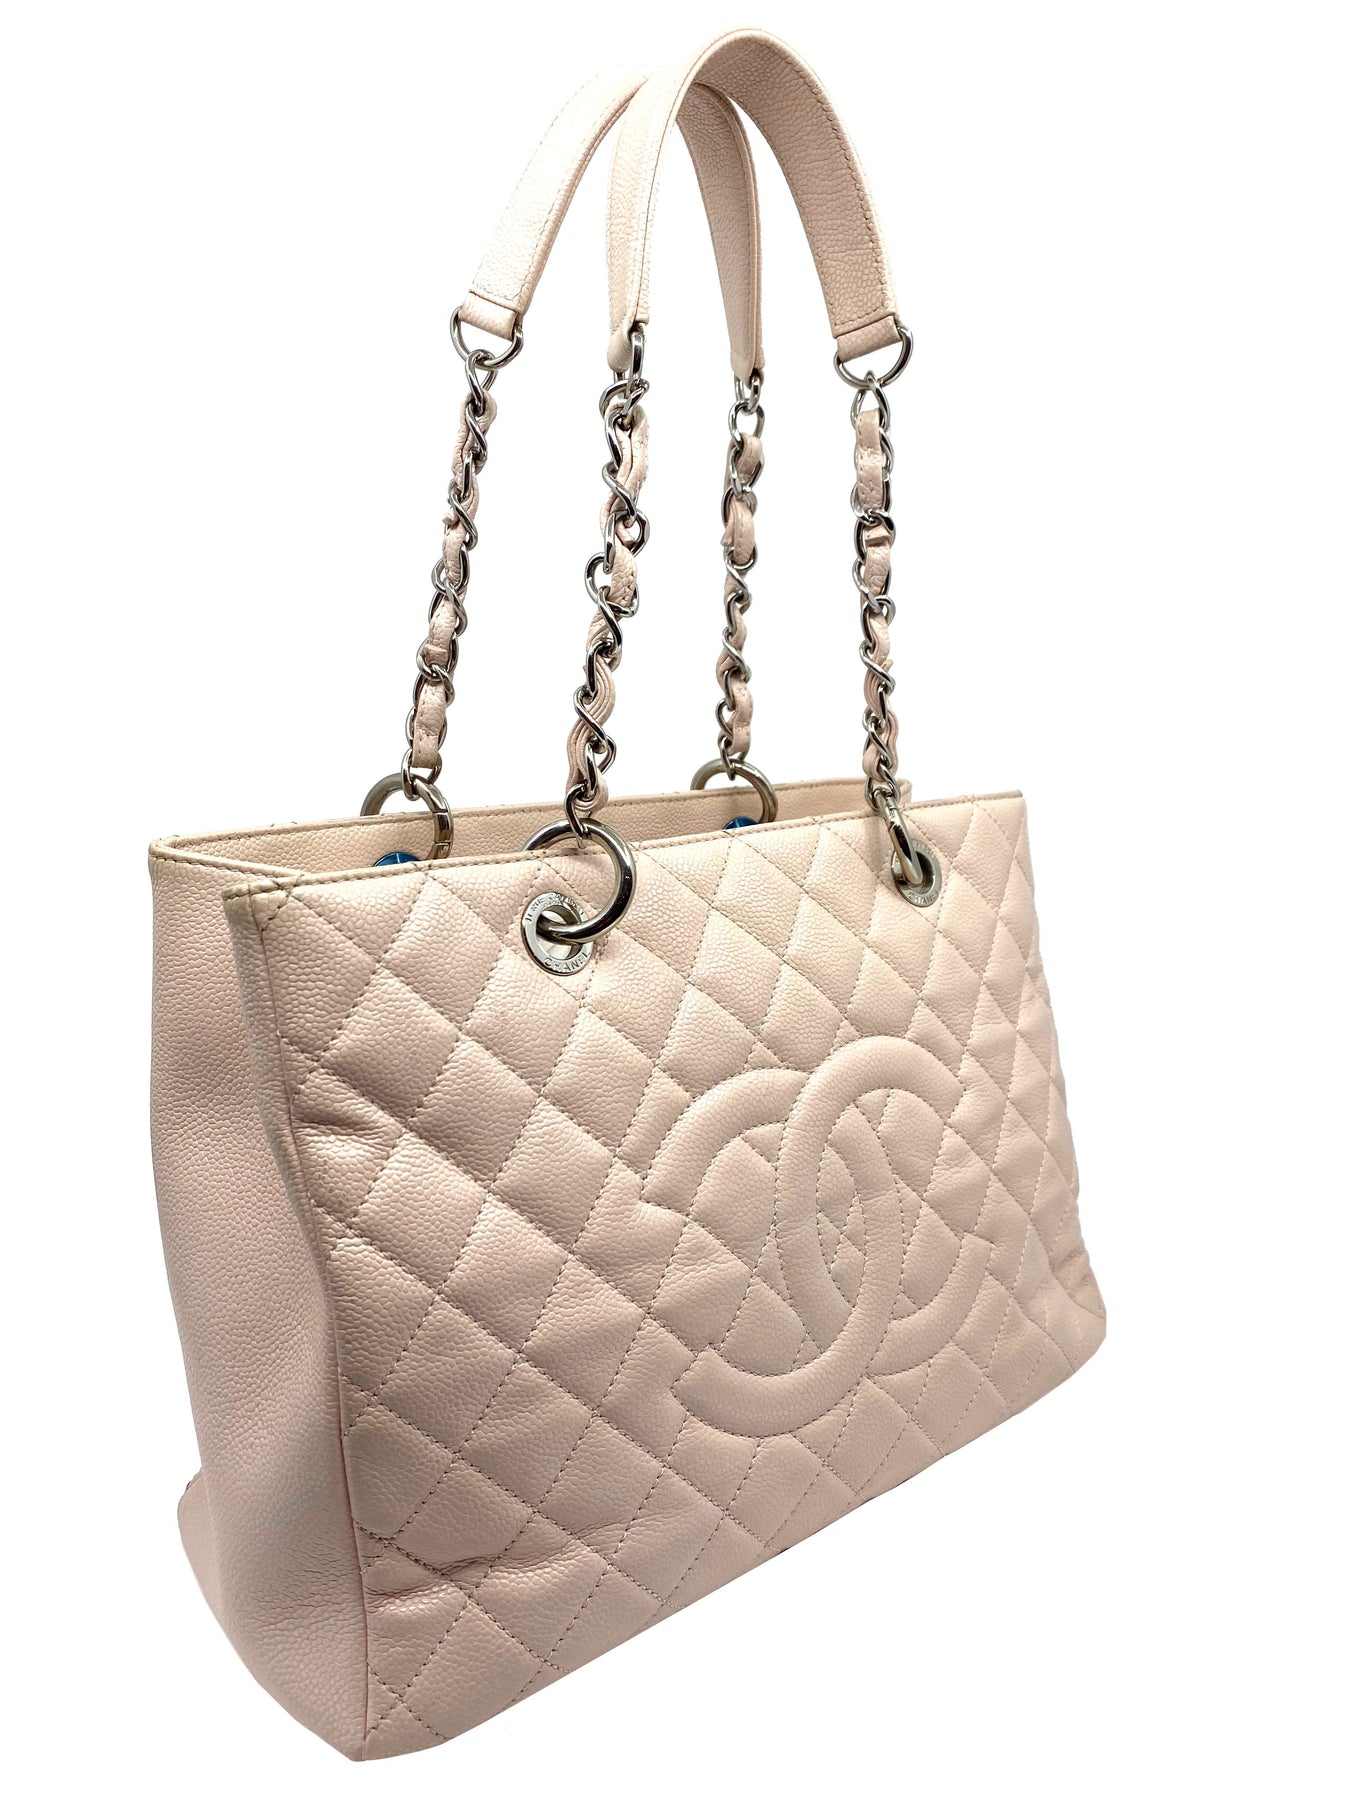 Chanel Caviar Quilted Grand Shopping Tote Gst Coral Bag